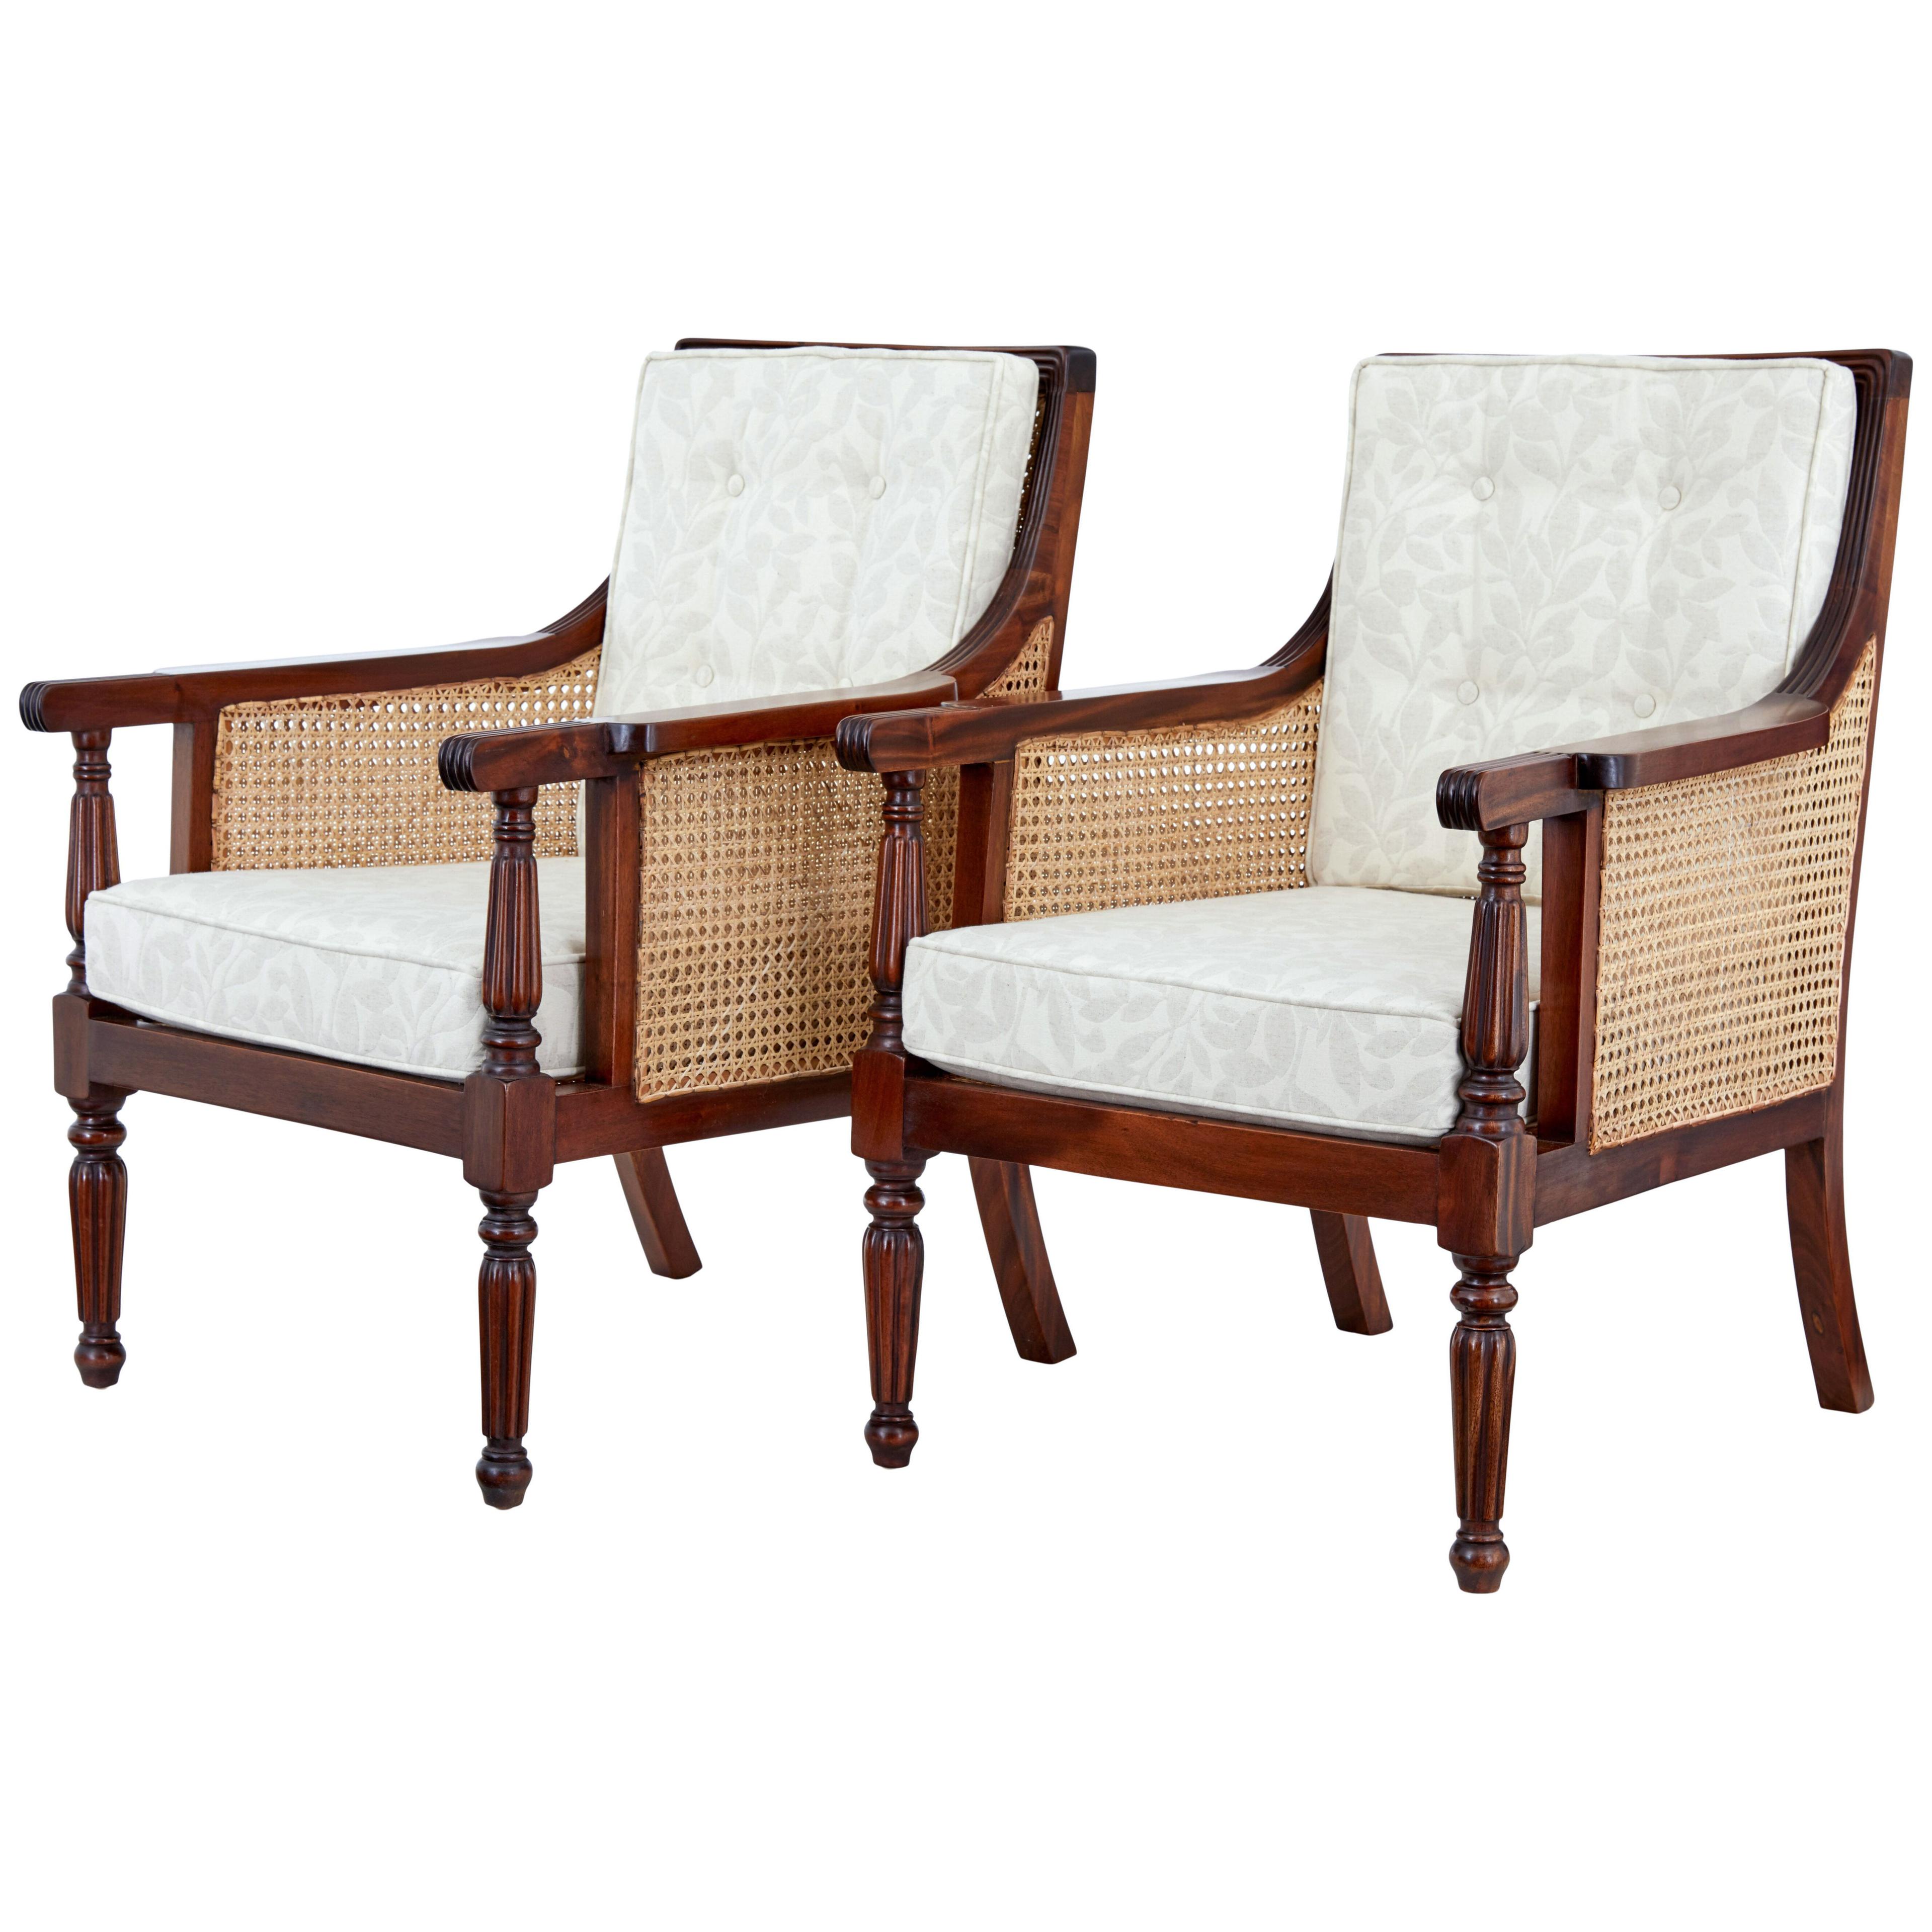 PAIR OF BERGERE CANE WORK LOUNGE CHAIRS